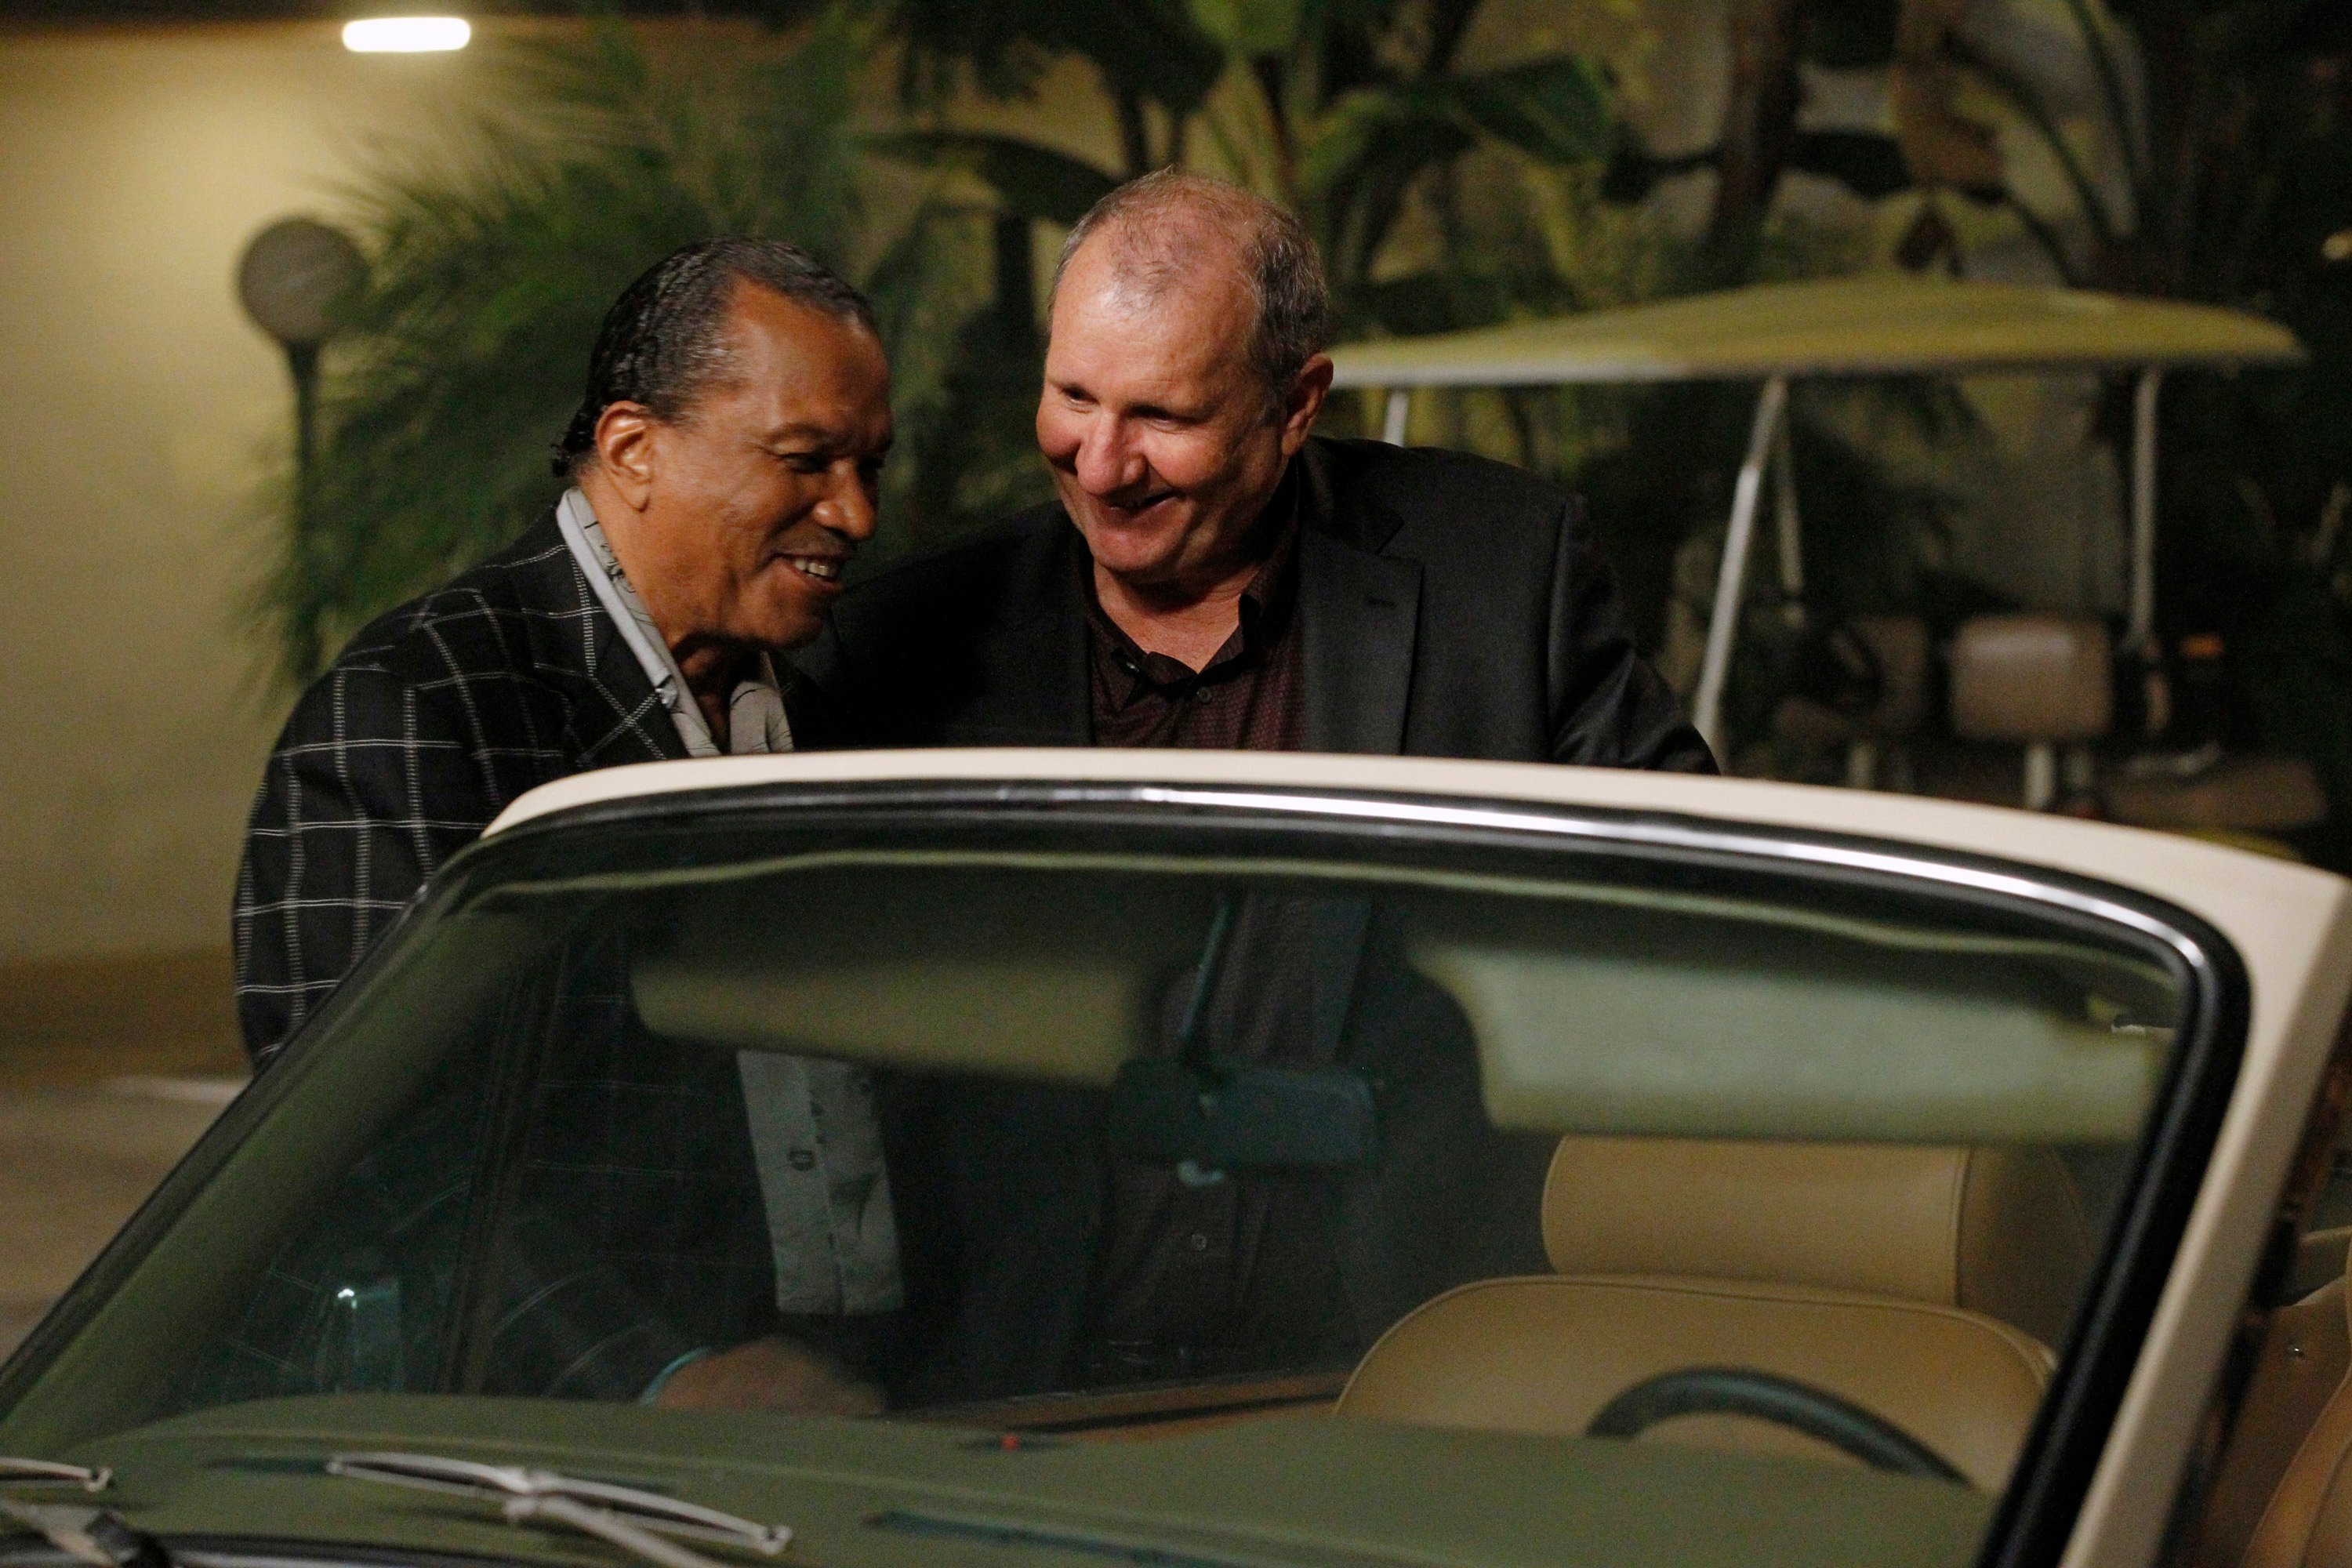 'Modern Family' episode titled 'New Year's Eve,' featuring Billy Dee Williams